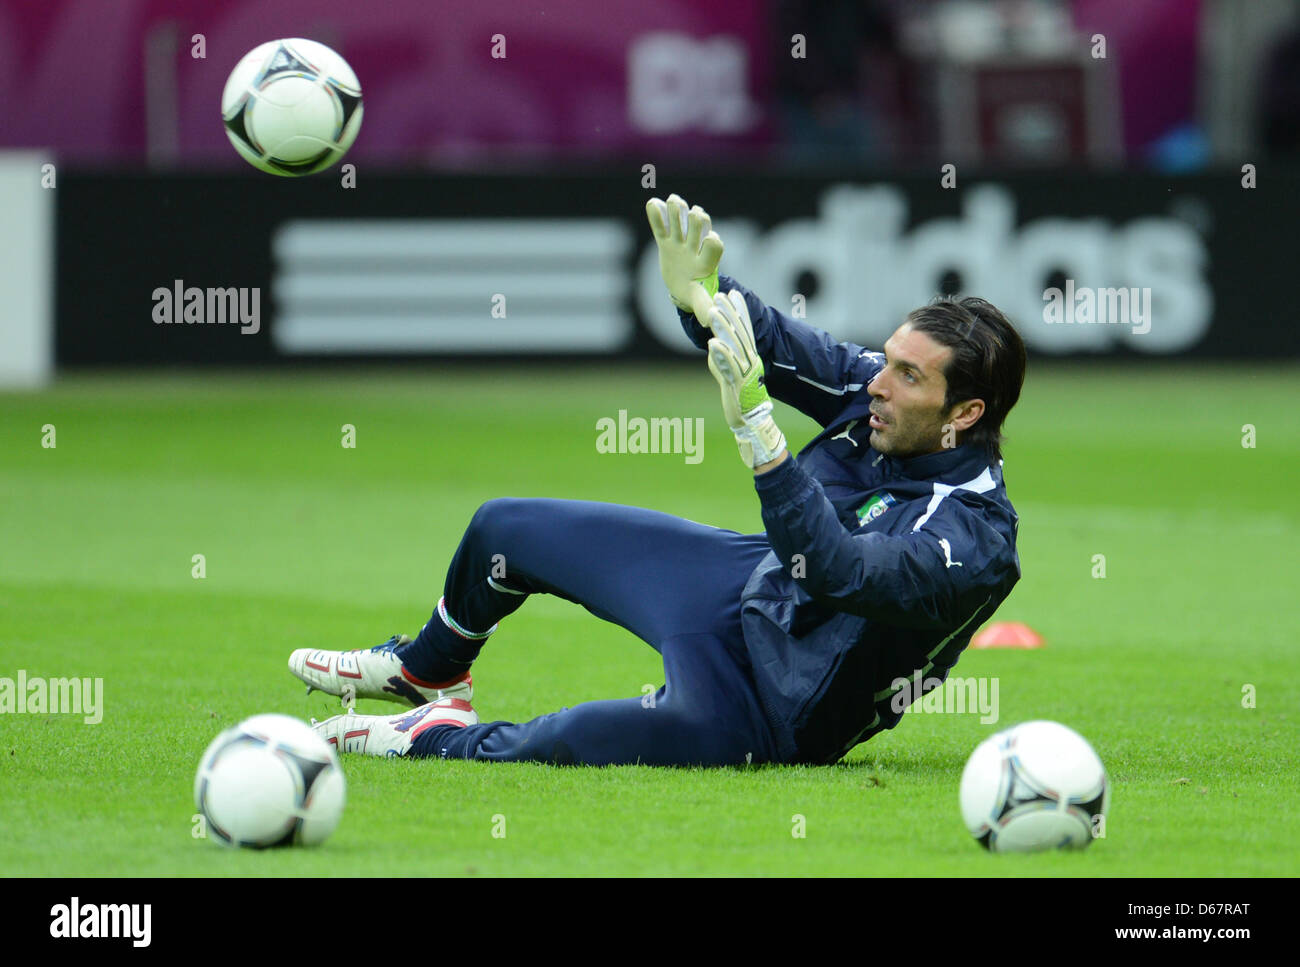 Italy's goalkeeper Gianluigi Buffon catches the ball during a training session of the Italian national soccer team at the National Stadium in Warsaw, Poland, 27 June 2012. Photo: Andreas Gebert dpa (Please refer to chapters 7 and 8 of http://dpaq.de/Ziovh for UEFA Euro 2012 Terms & Conditions) Stock Photo